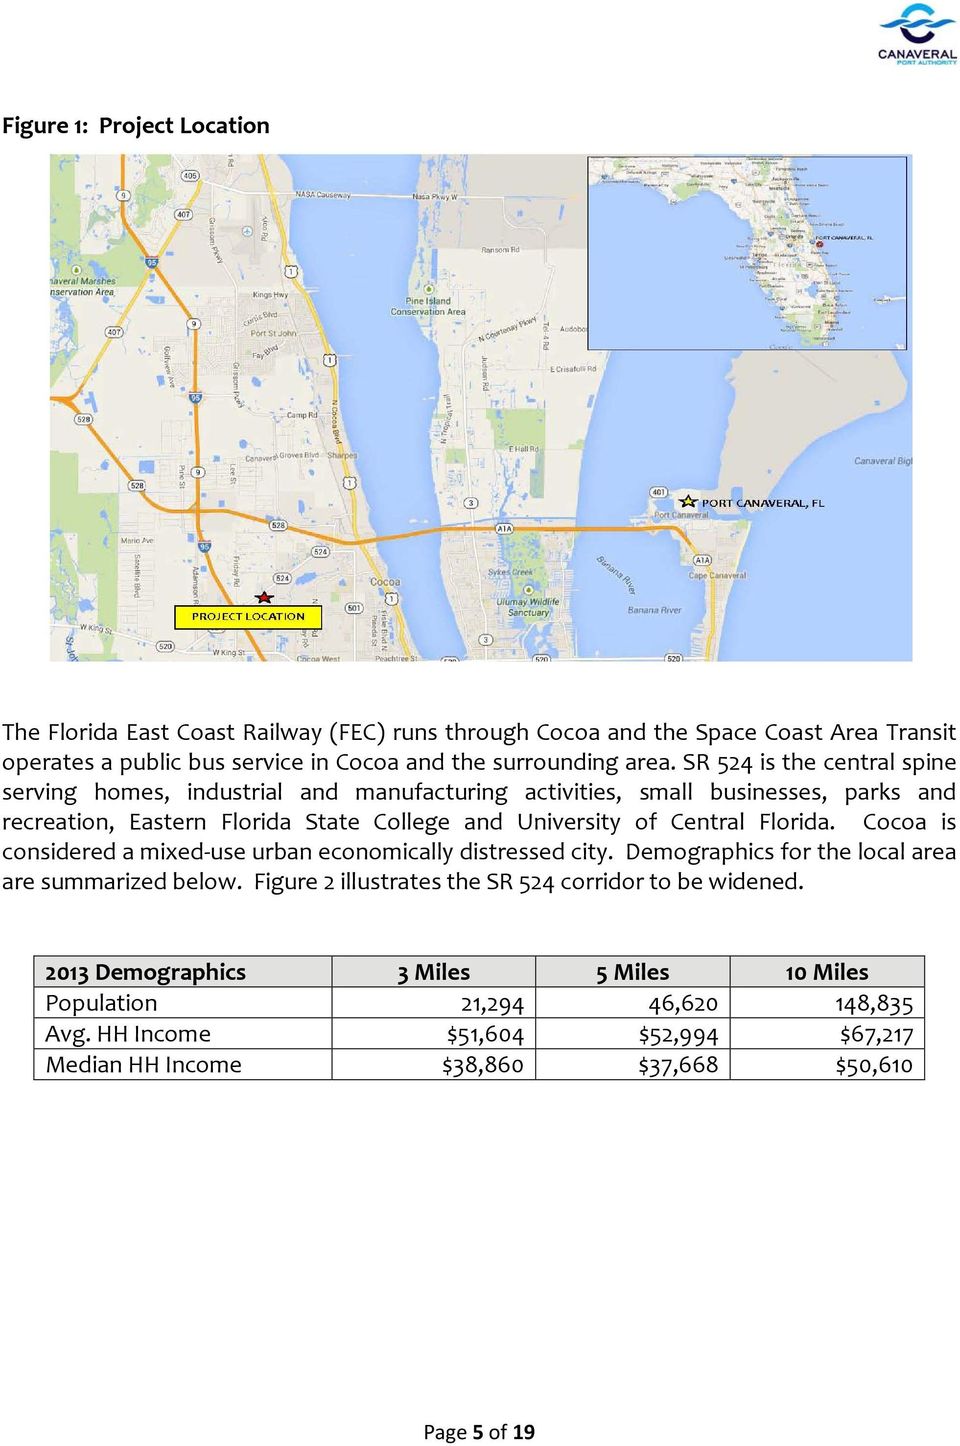 Central Florida. Cocoa is considered a mixed use urban economically distressed city. Demographics for the local area are summarized below.